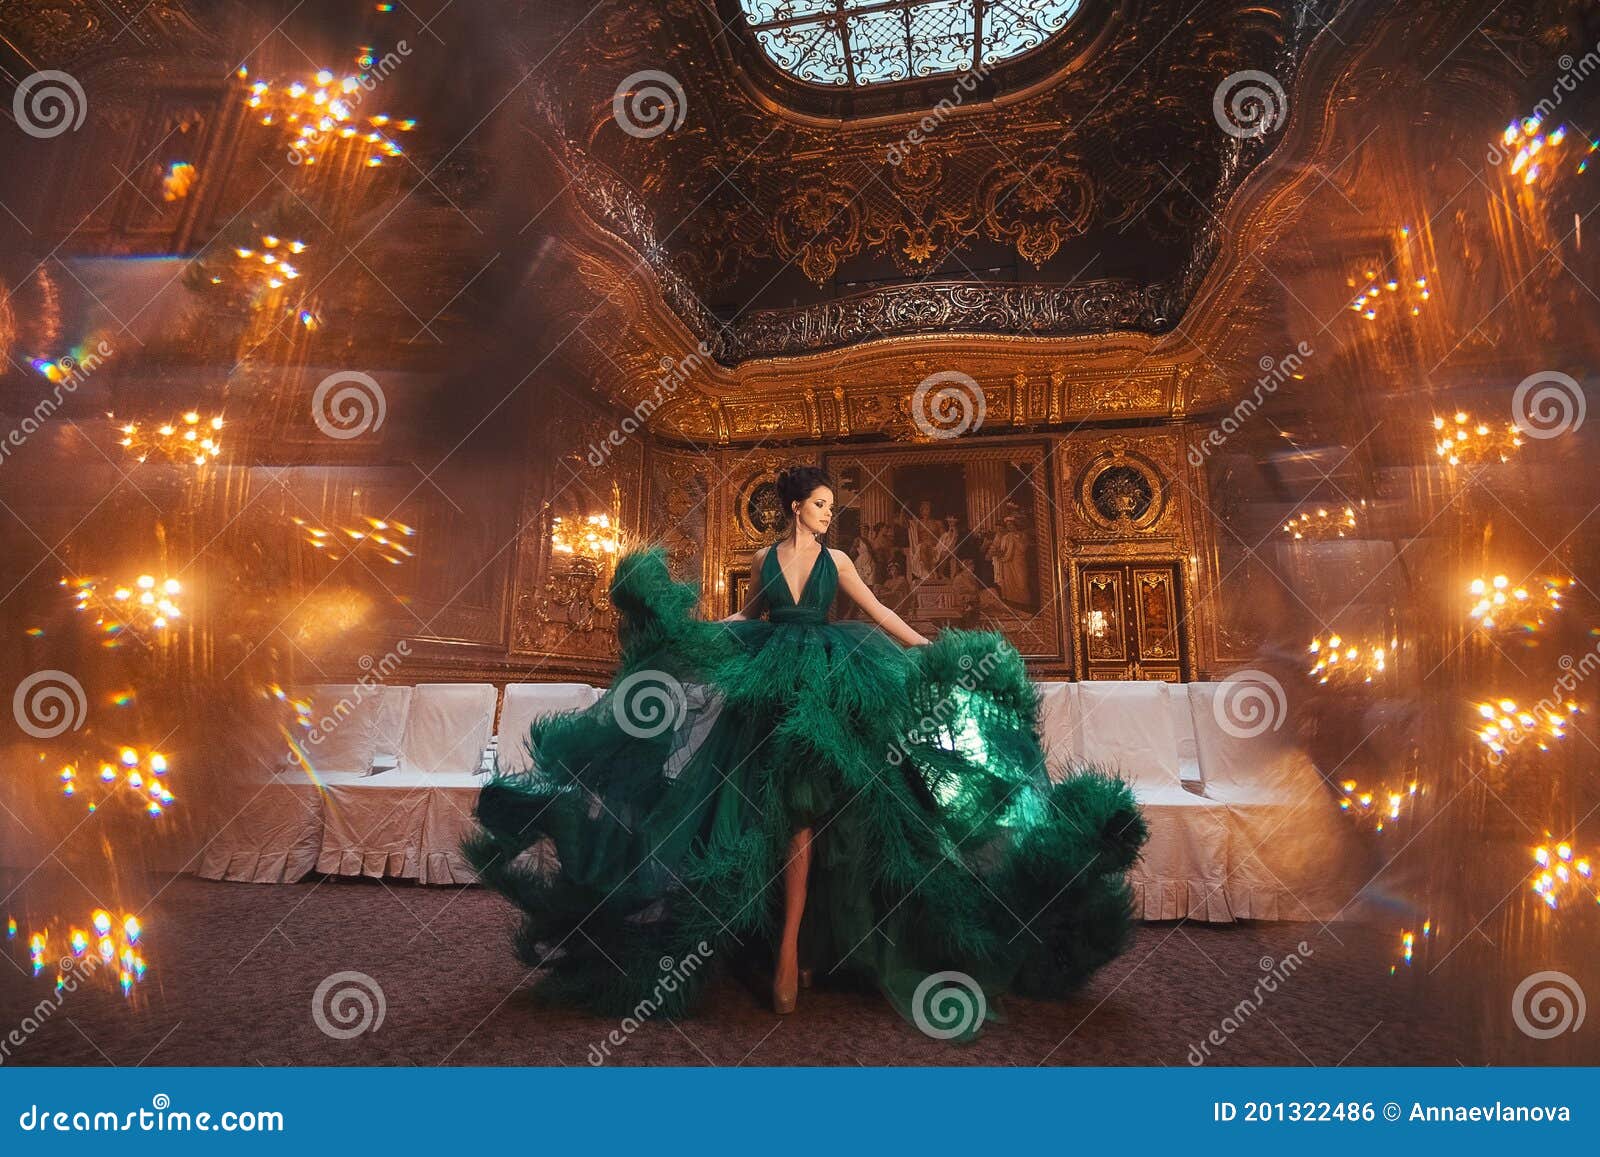 portrait of a beautiful girl in a haute couture green dress.